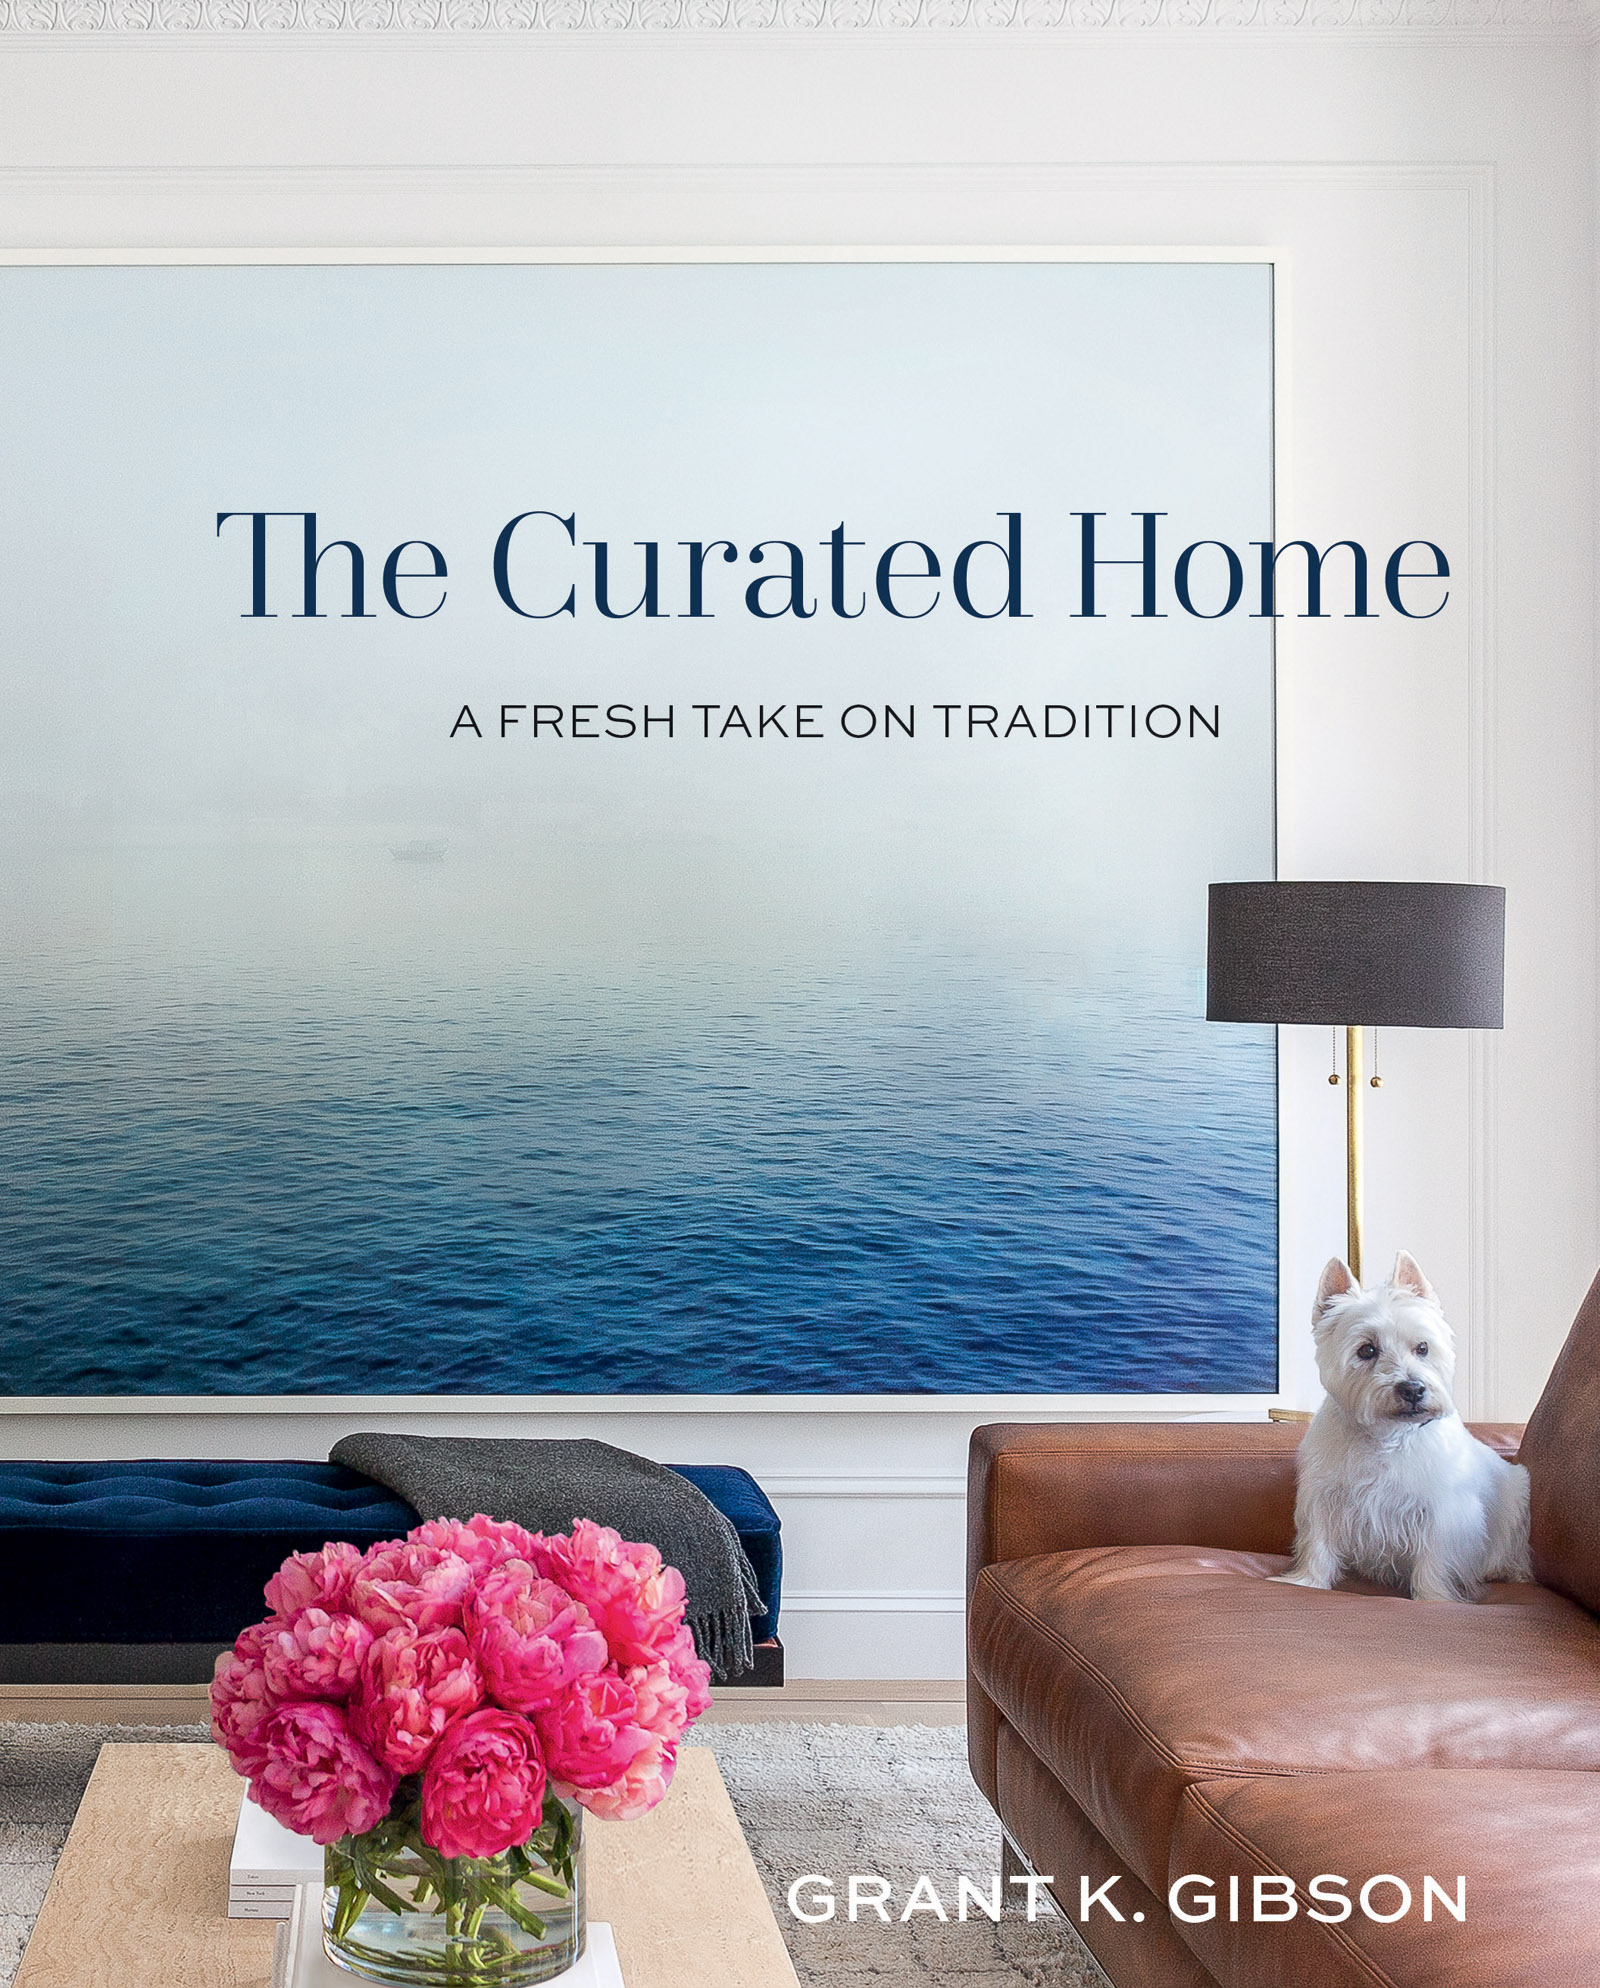 The book jacket of The Curated Home by Grant K. Gibson